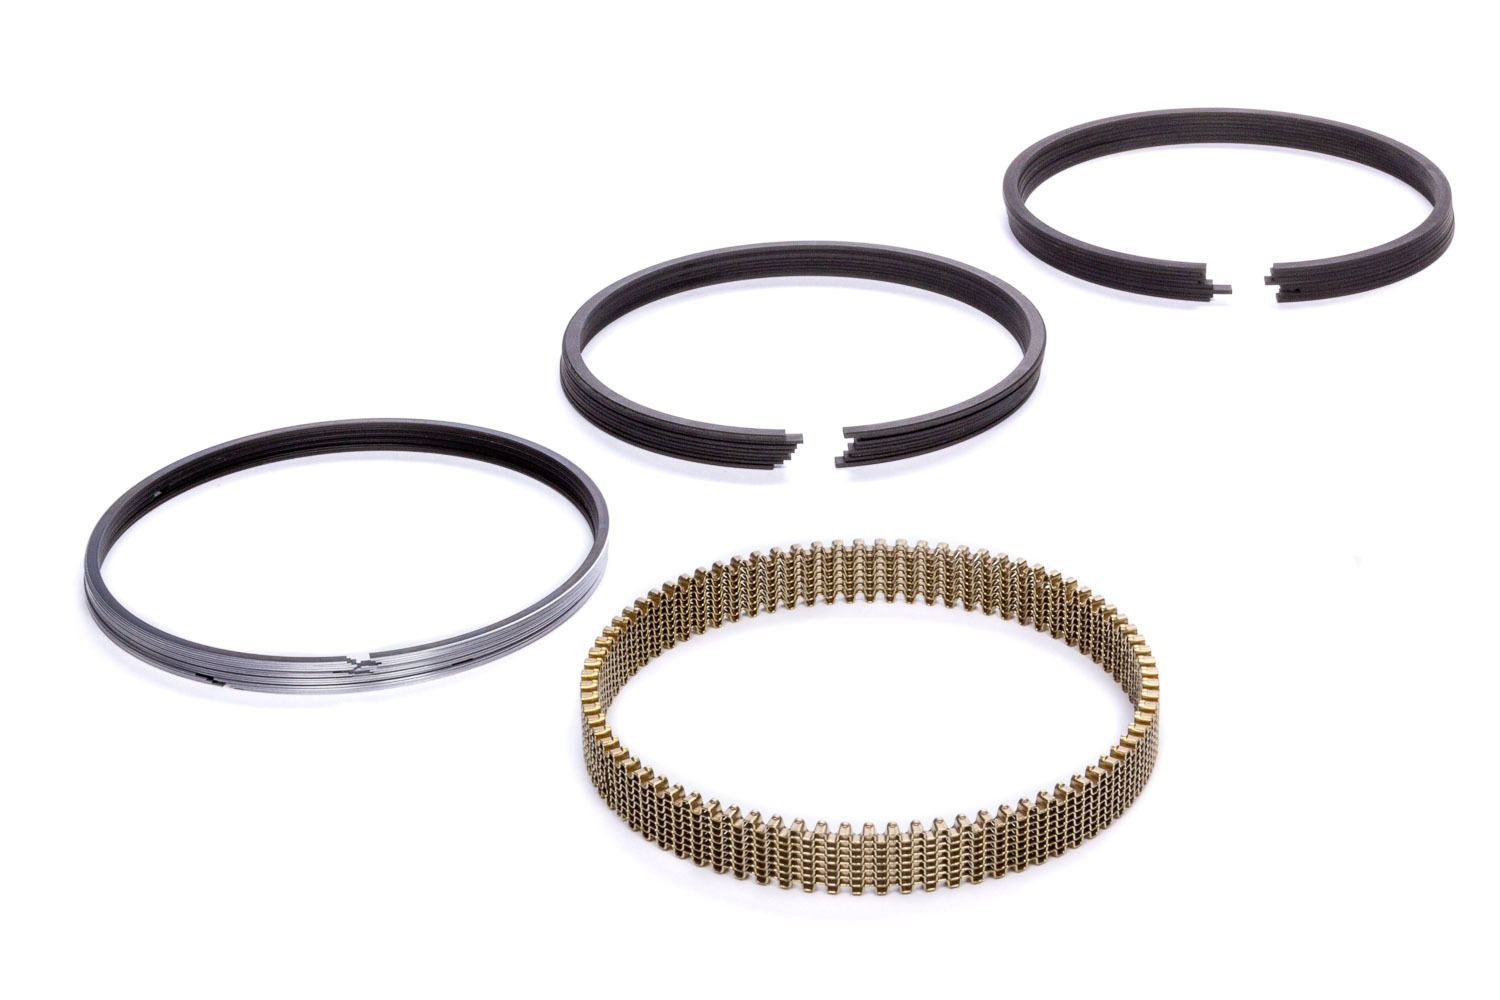 Hastings Piston Rings SN9050030 Piston Rings, Premium Ductile and Steel Series, 4.155 in Bore, Drop In, 1.2 x 1.2 x 3.0 mm Thick, Standard Tension, Stainless Steel, Gas Nitride, 8-Cylinder, Kit